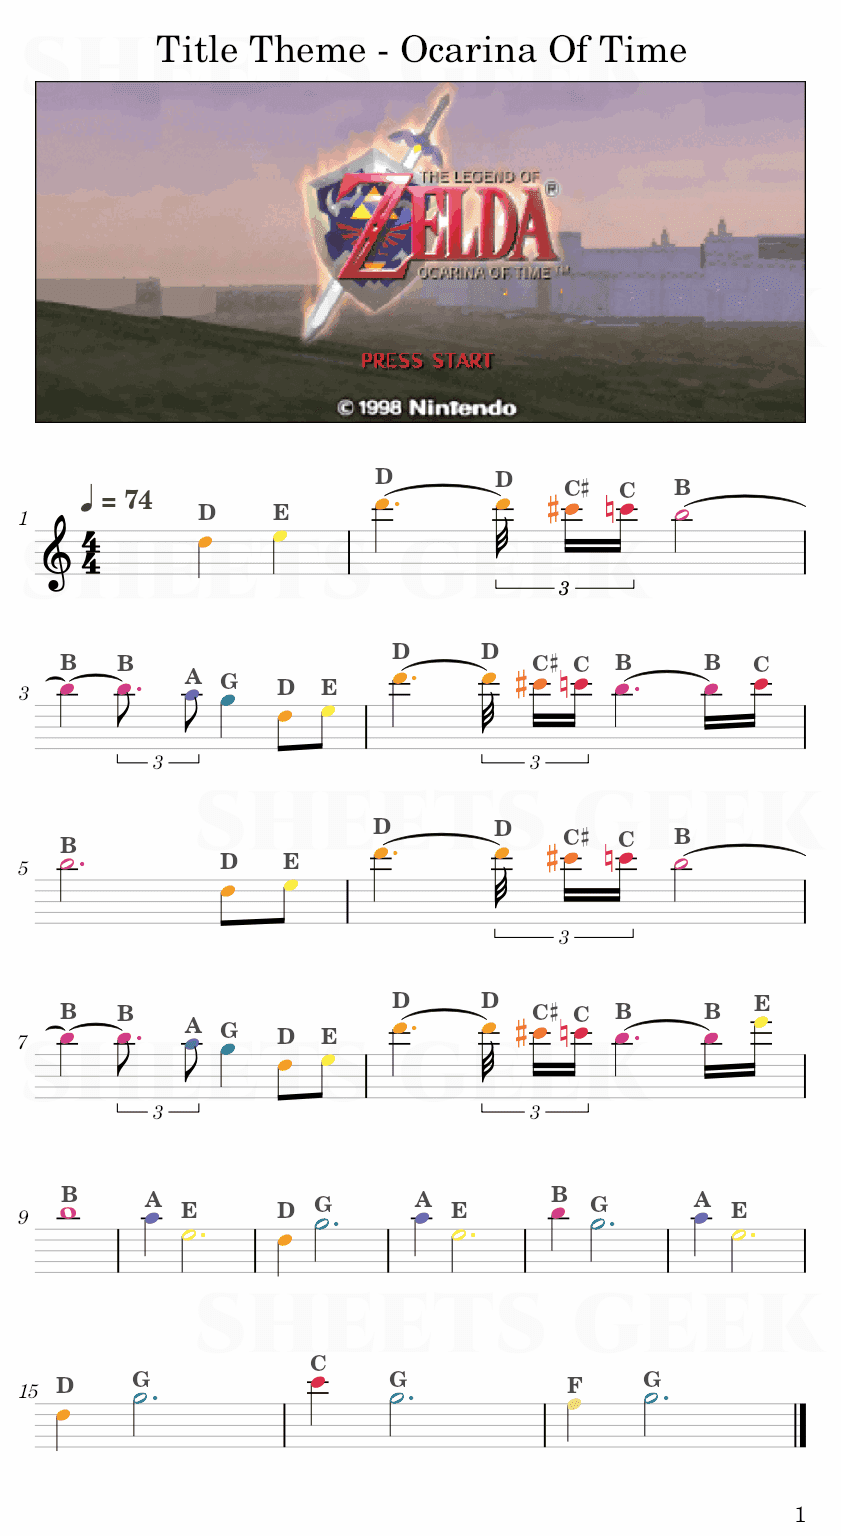 Title Theme - The Legend Of Zelda: Ocarina Of Time Easy Sheet Music Free for piano, keyboard, flute, violin, sax, cello page 1